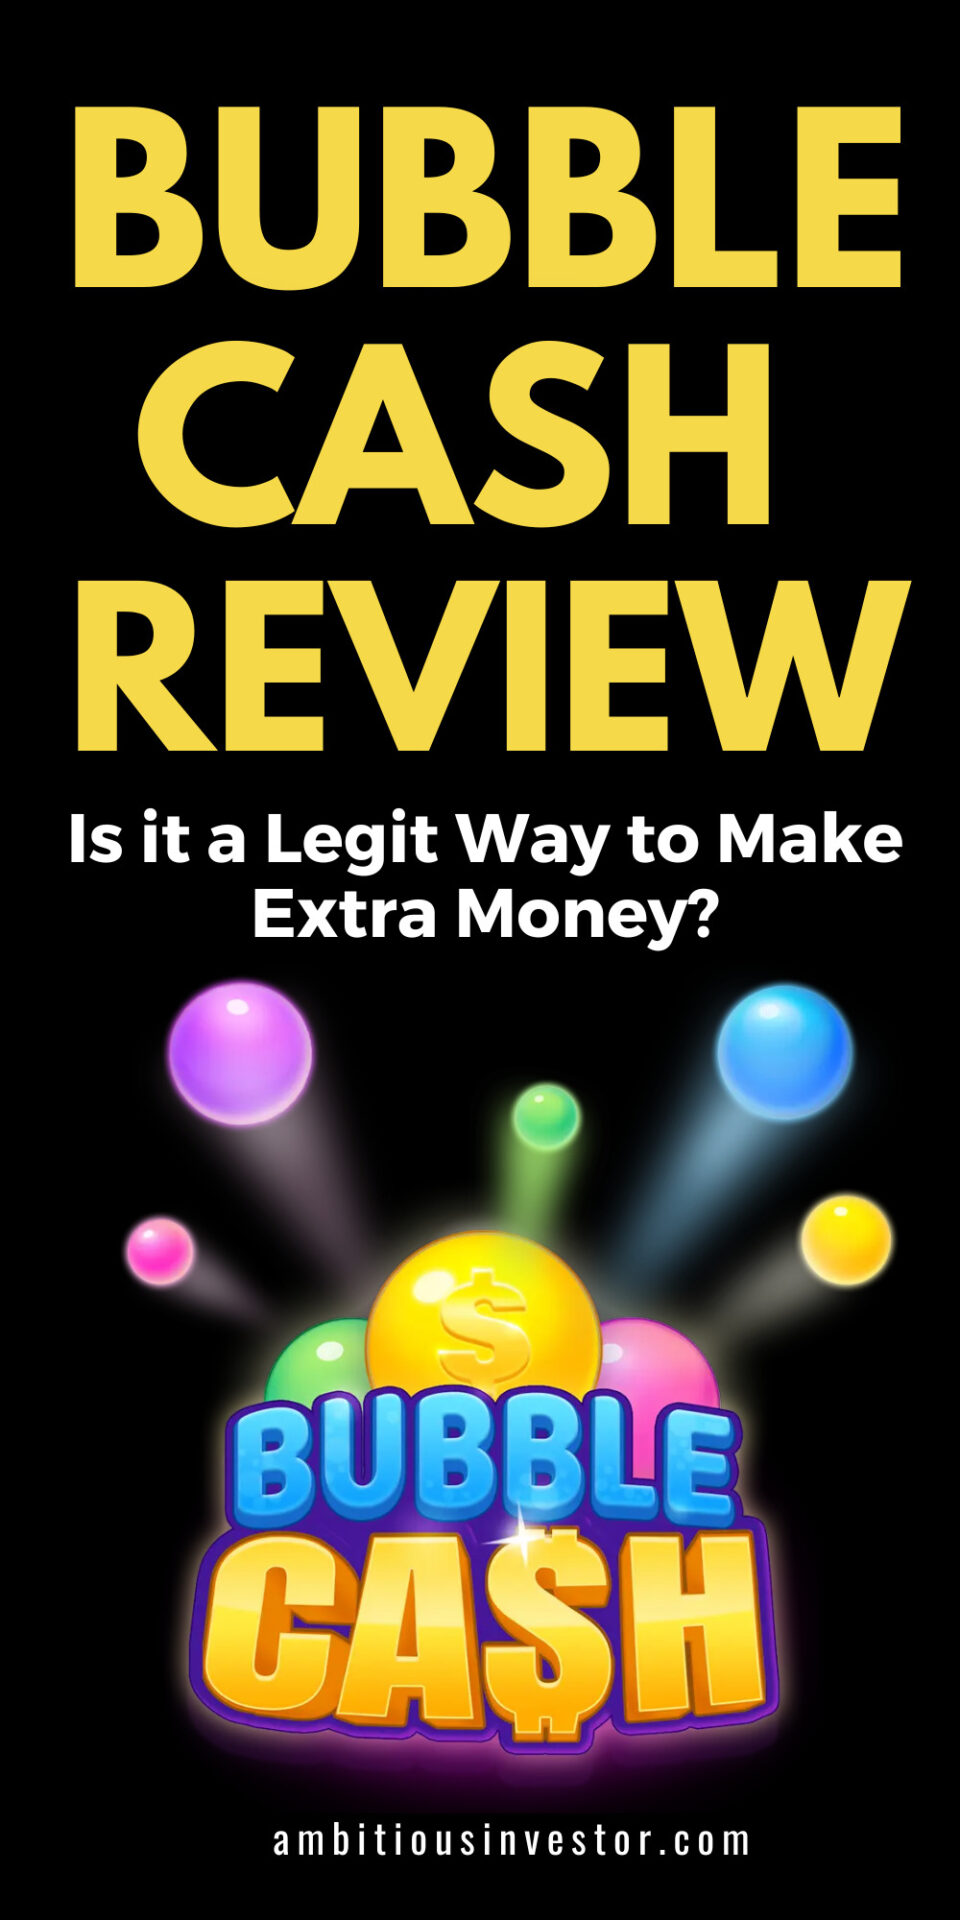 Bubble Cash Review: Is it a Legit Way to Make Extra Money?